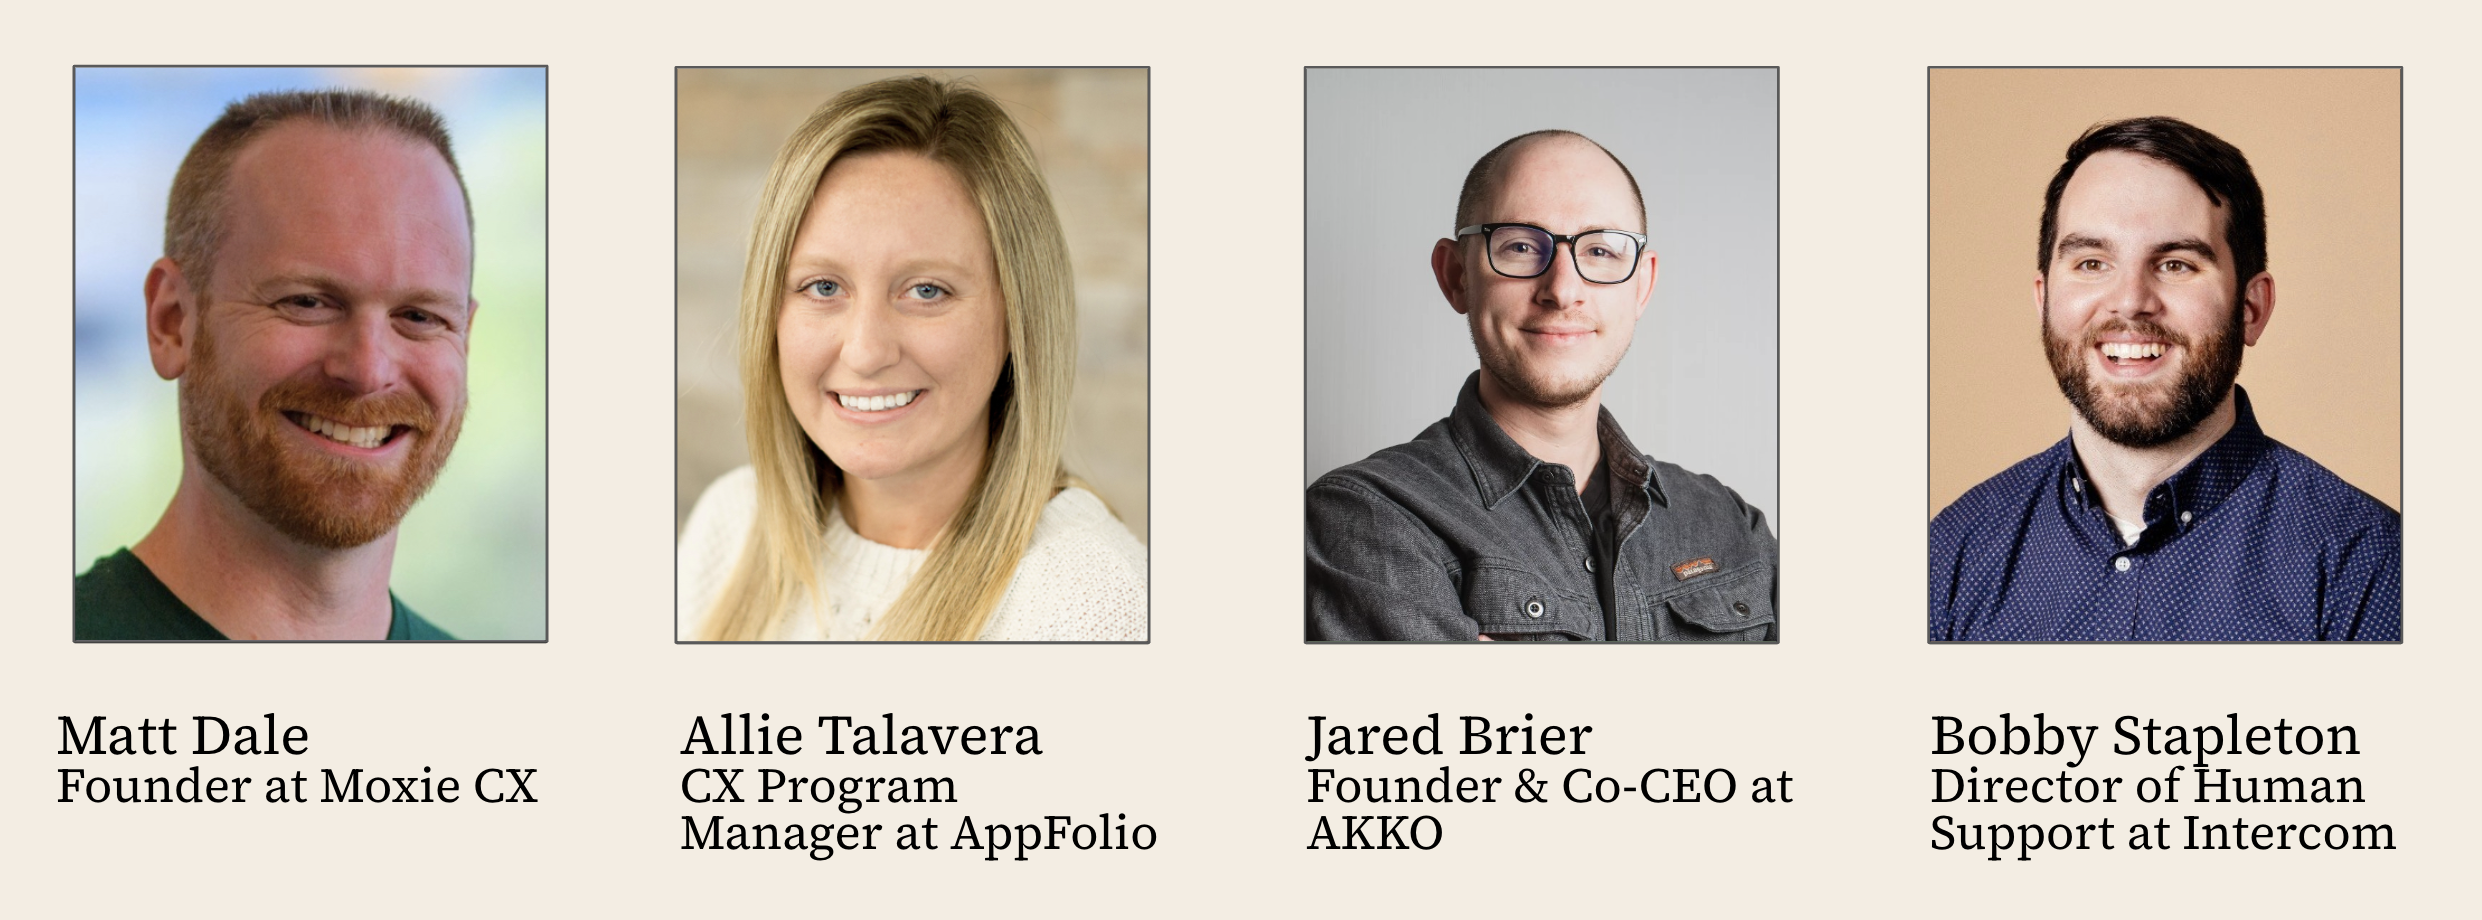 Customer service trends webinar panel: Matt Dale, Founder at Moxie CX, Allie Talavera, CX Program Manager at AppFolio, Jared Brier, Founder & Co-CEO at AKKO, and Bobby Stapleton, Director of Human Support at Intercom. 